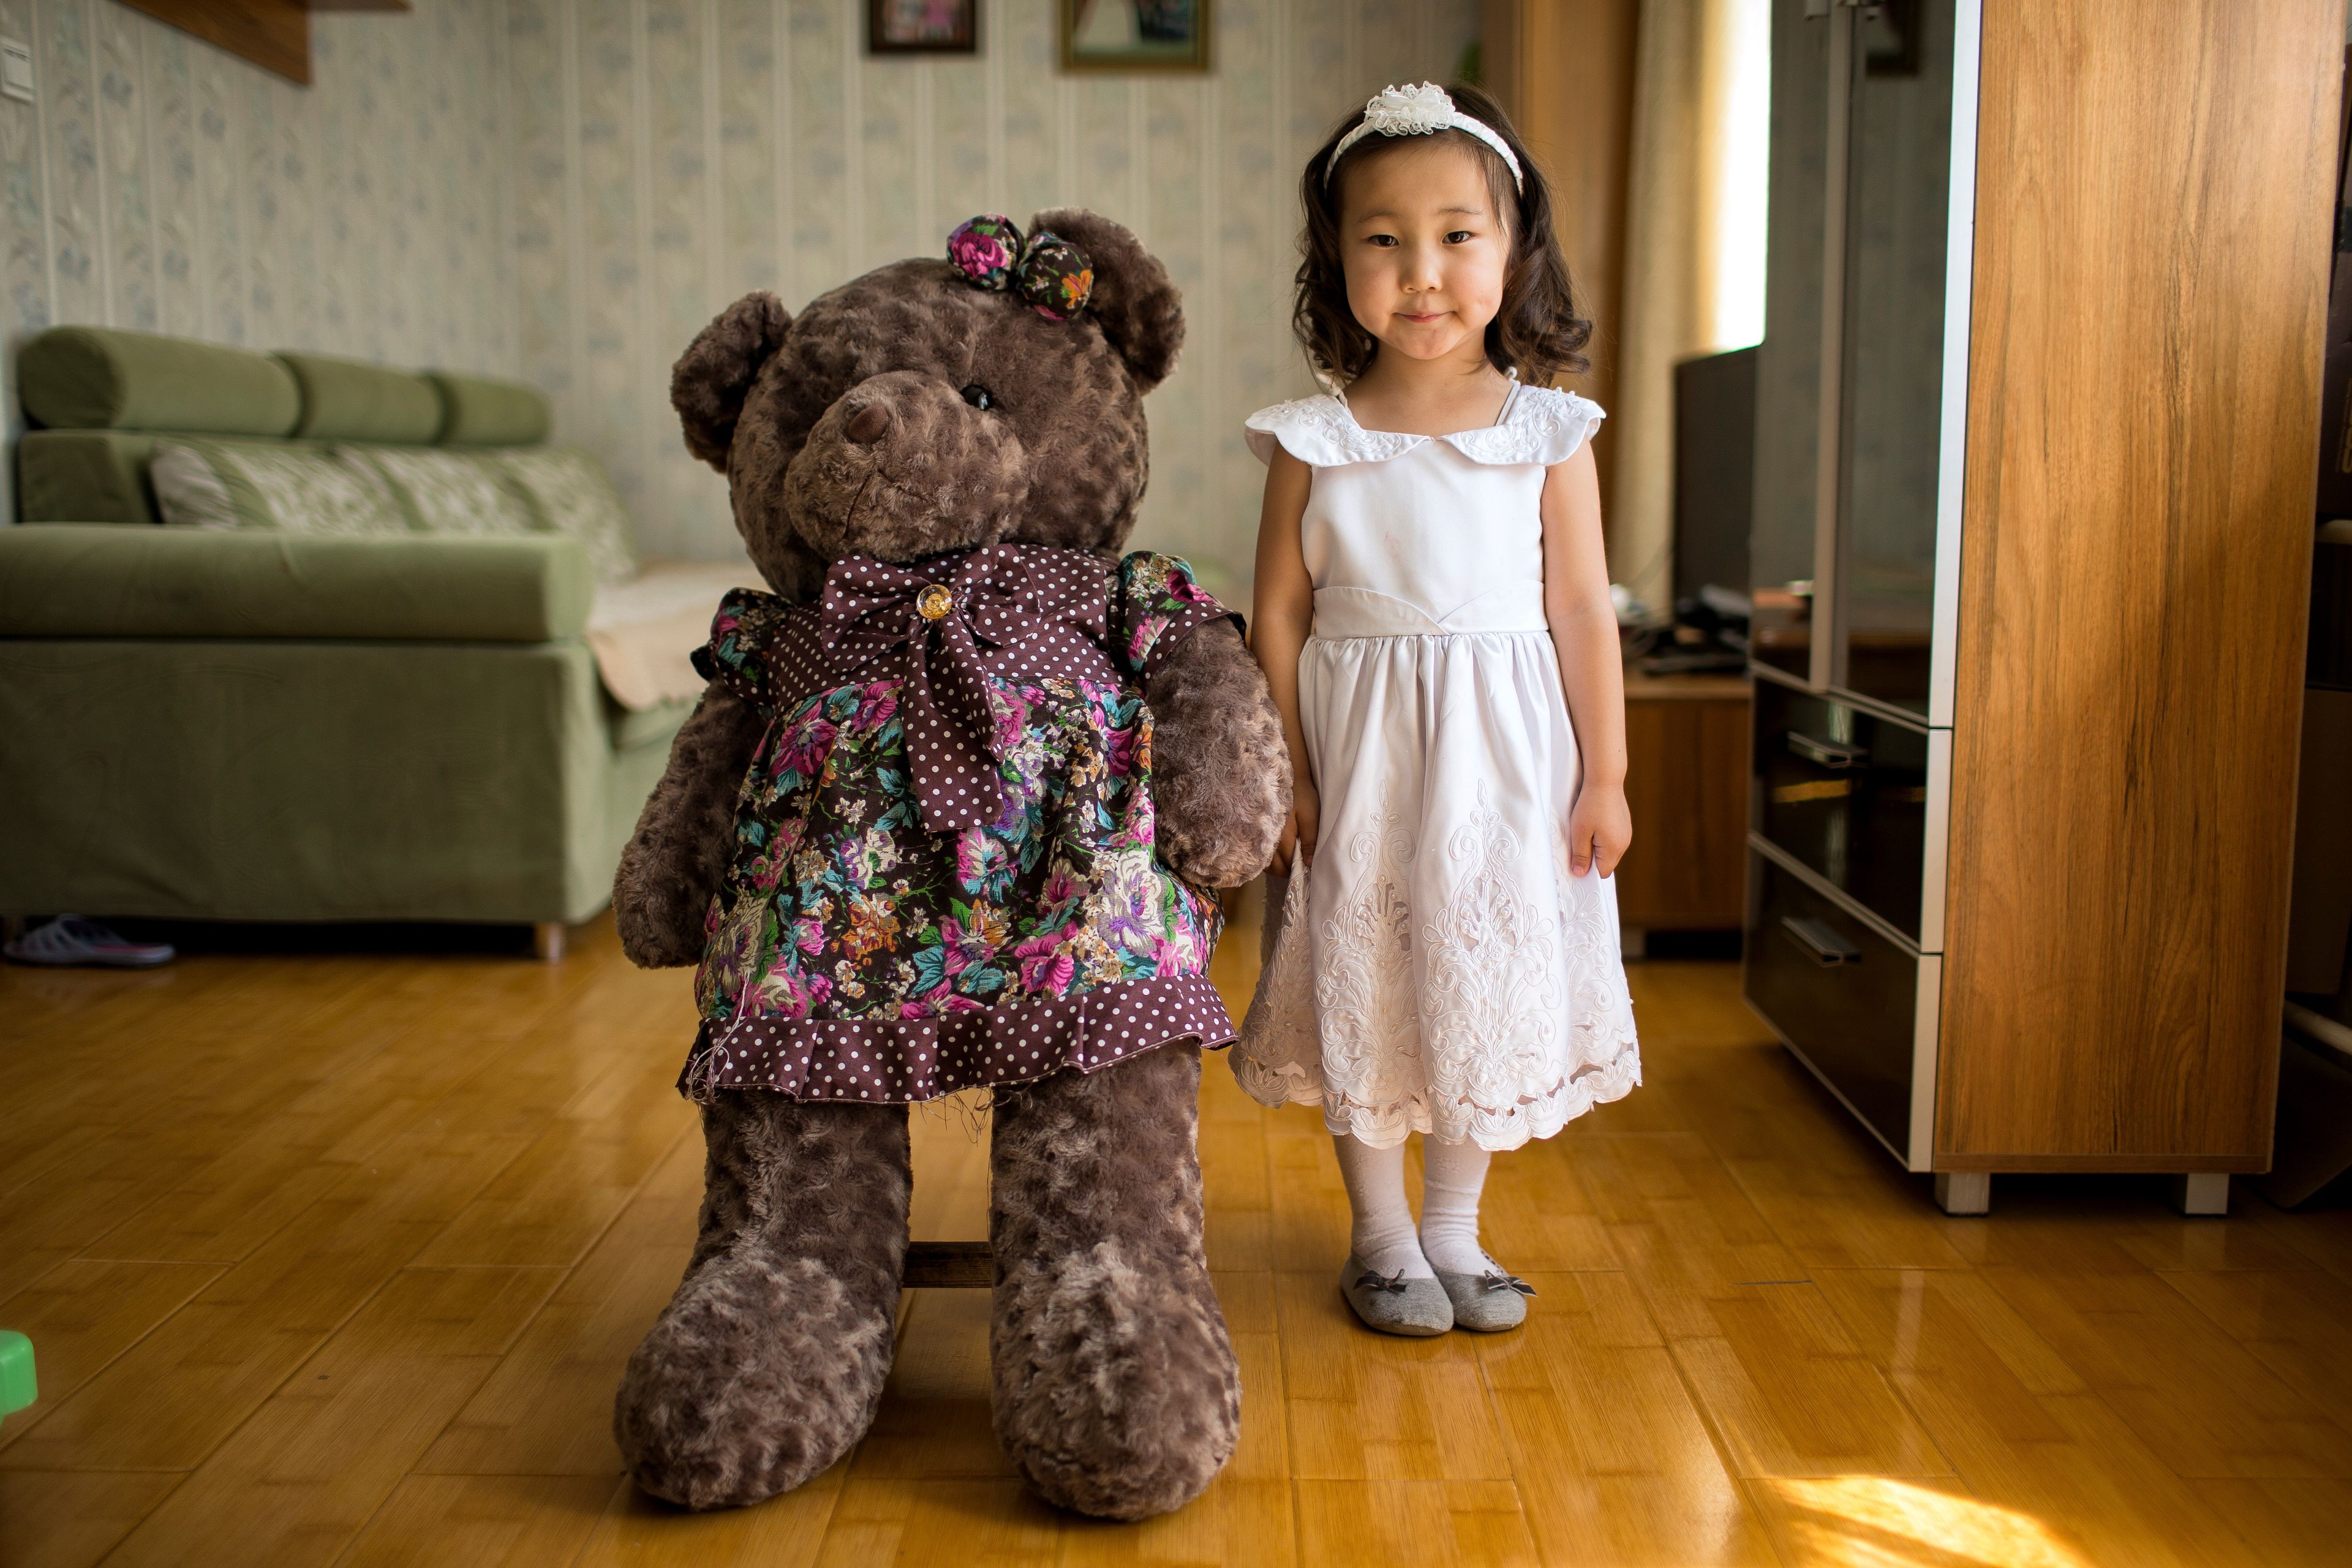 A young Mongolian girl with a white dress and a teddy bear.  